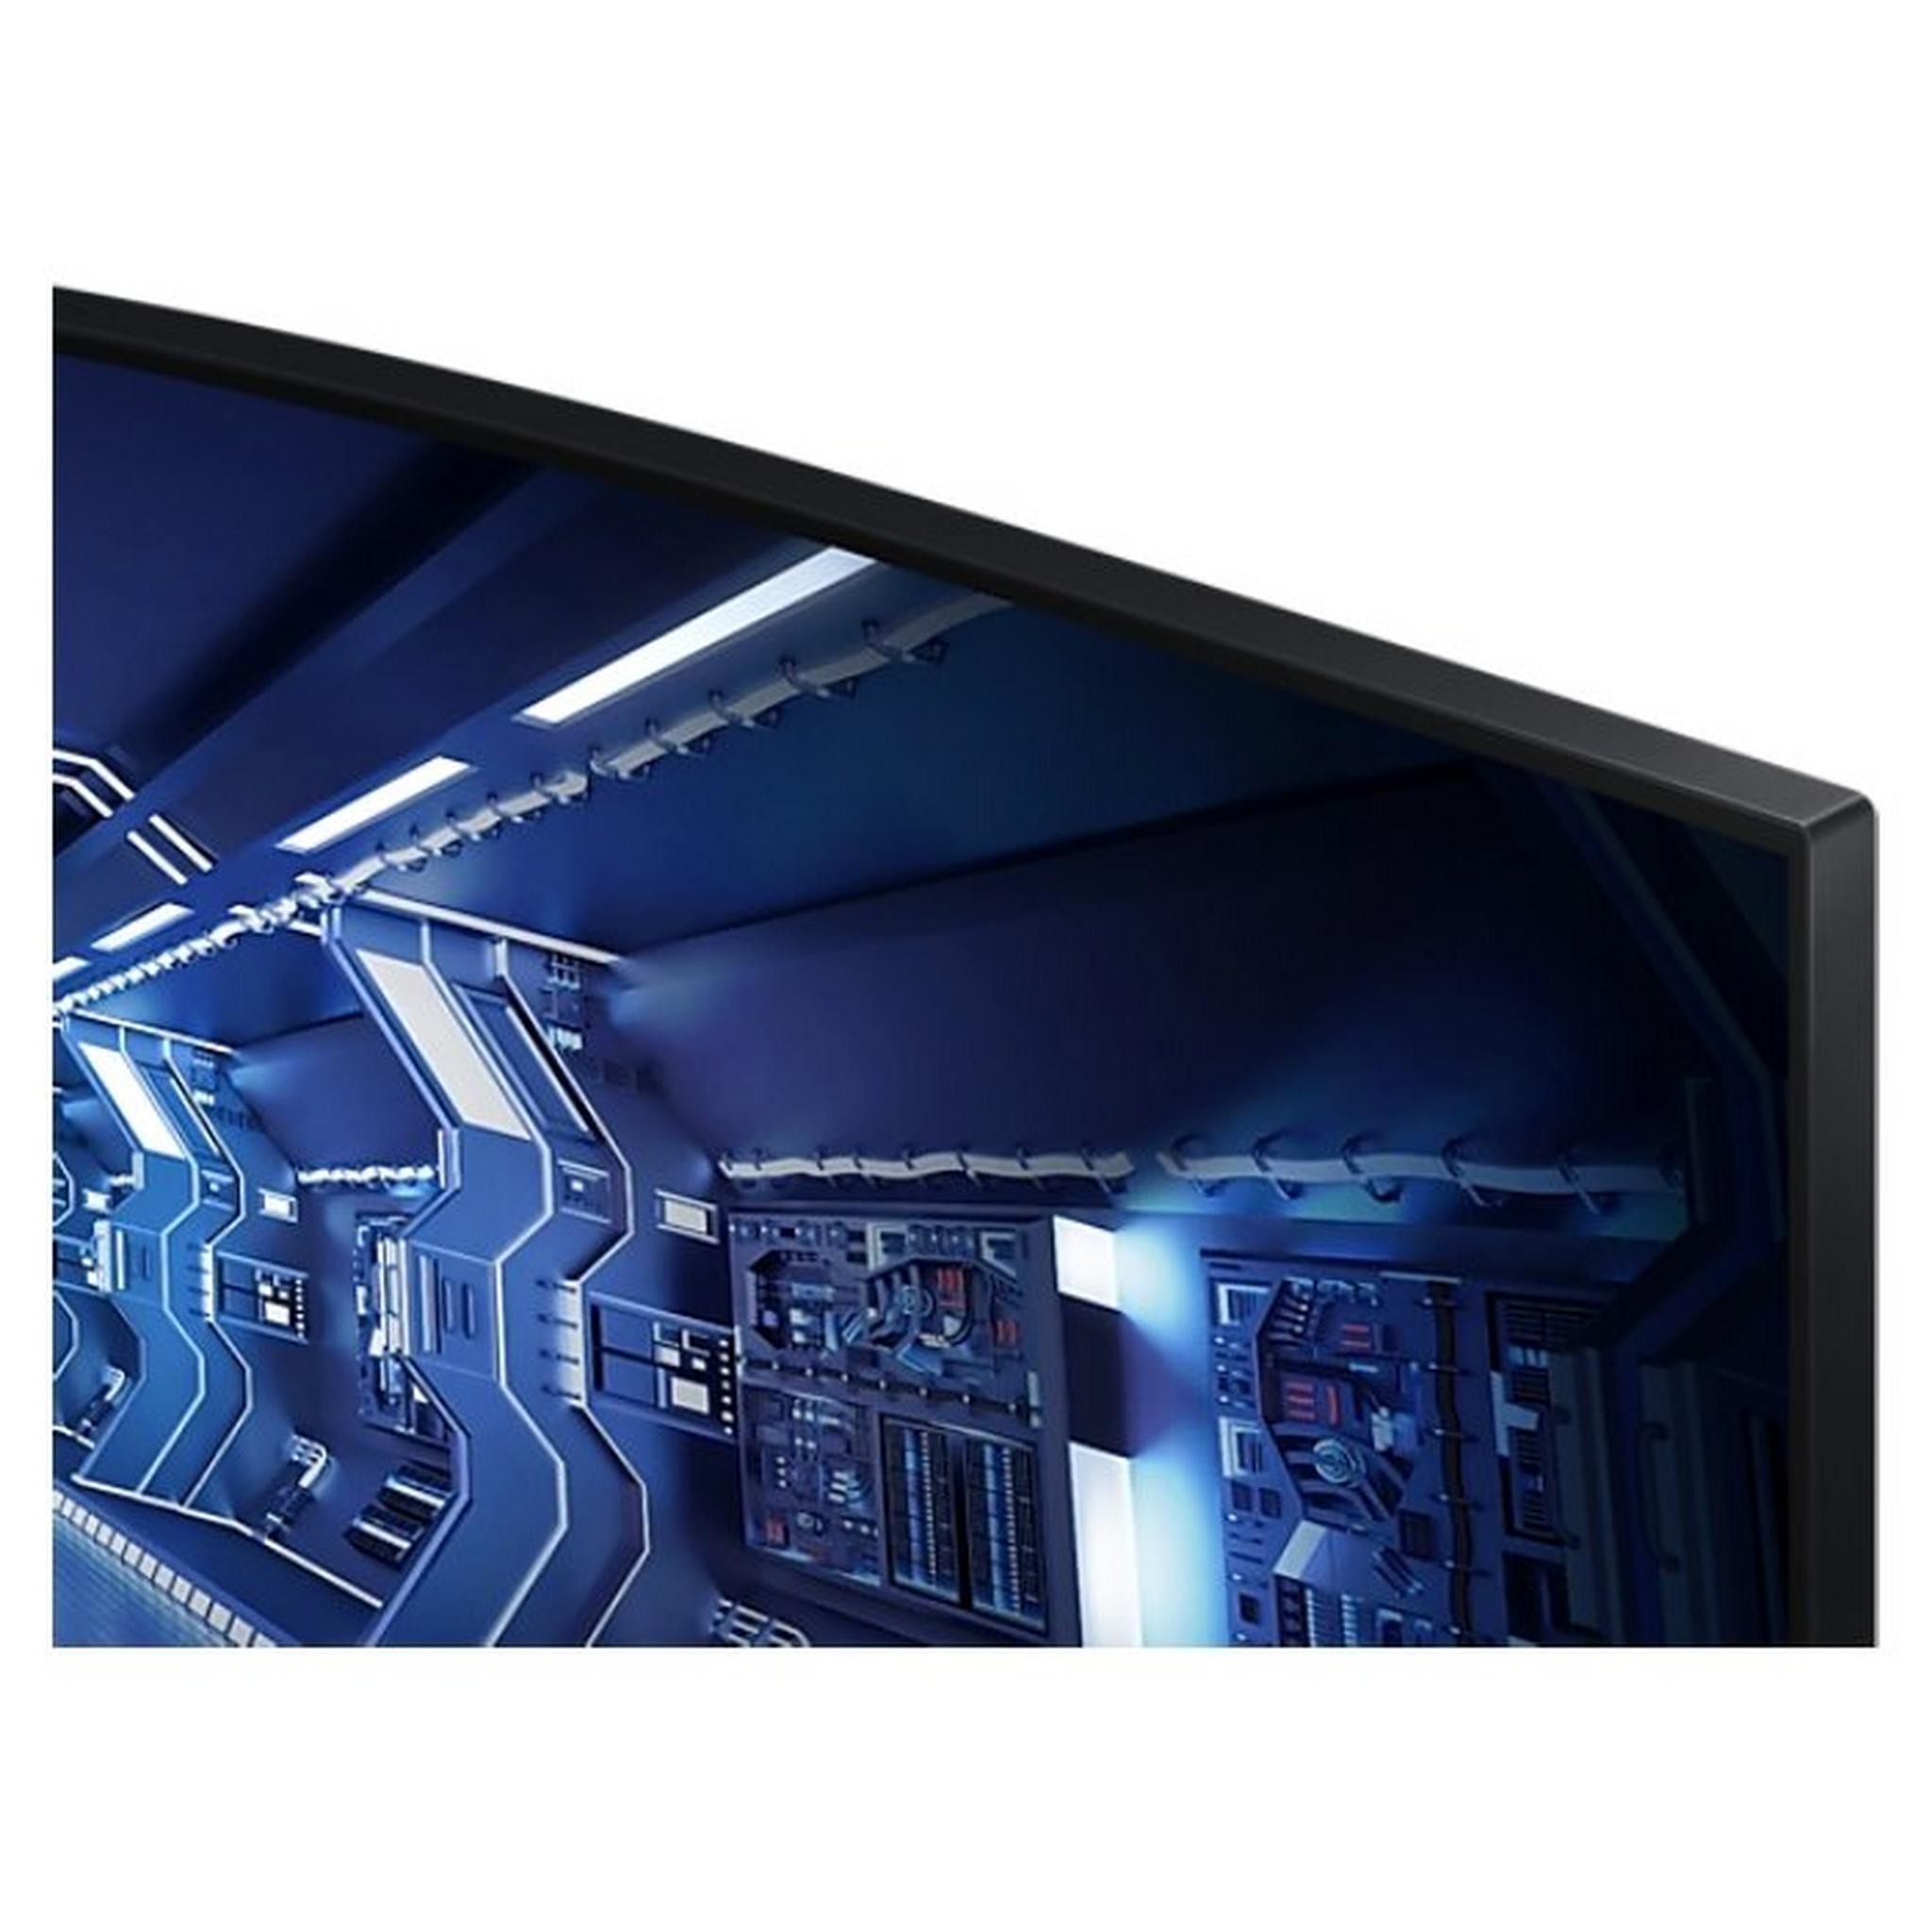 Samsung 34" Curved Gaming Monitor With 165Hz Refresh Rate